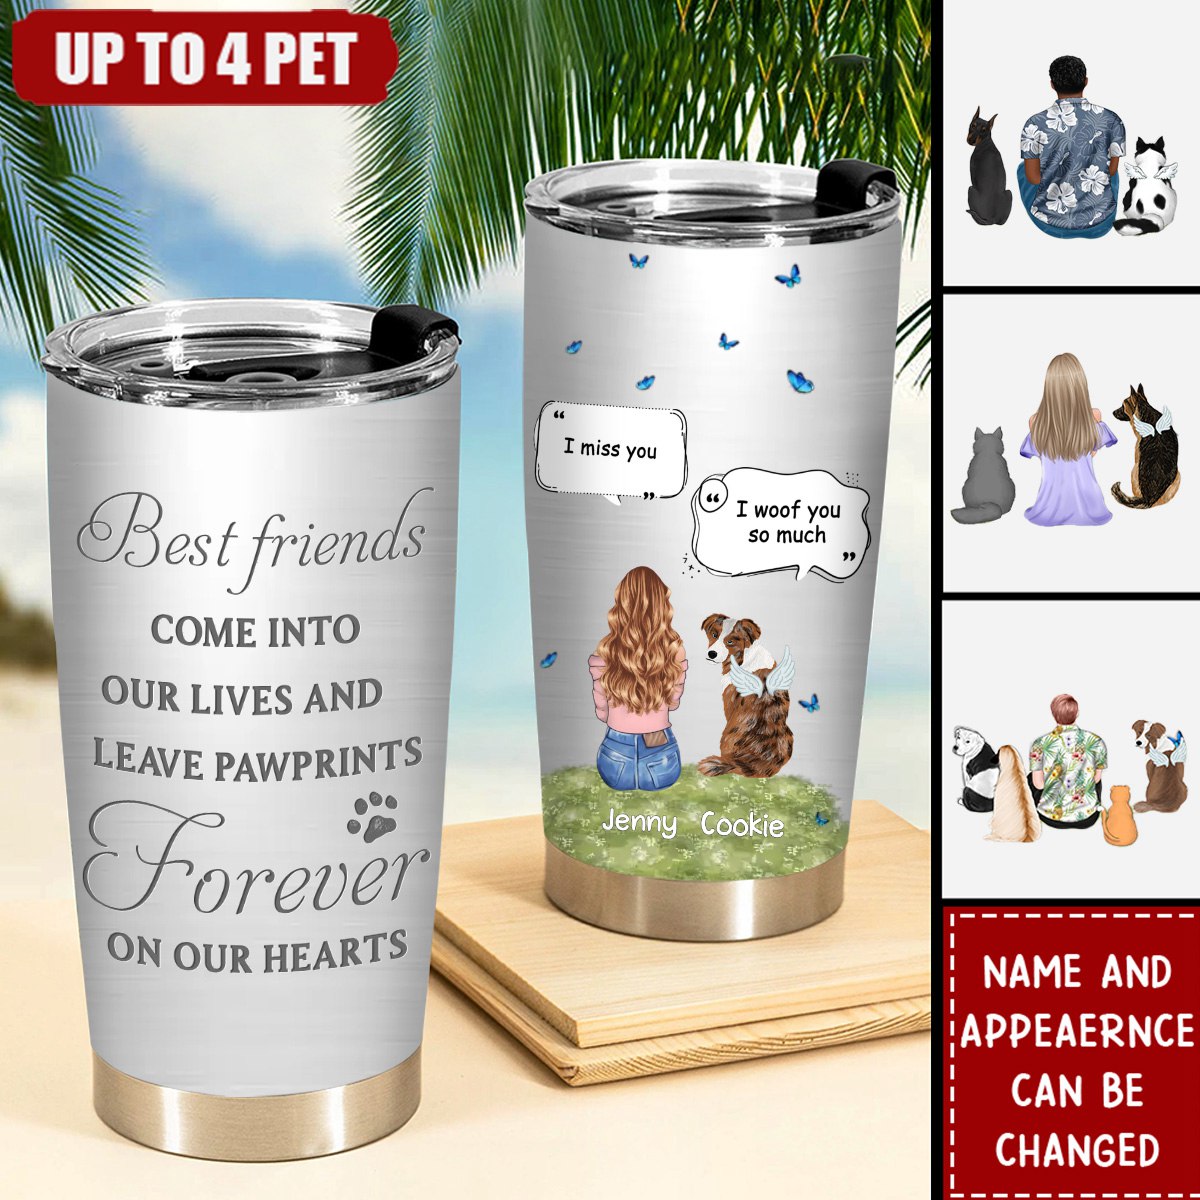 The Moment Your Heart Stopped Mine Changed Forever - Personalized Memorial Dog Cat Tumbler